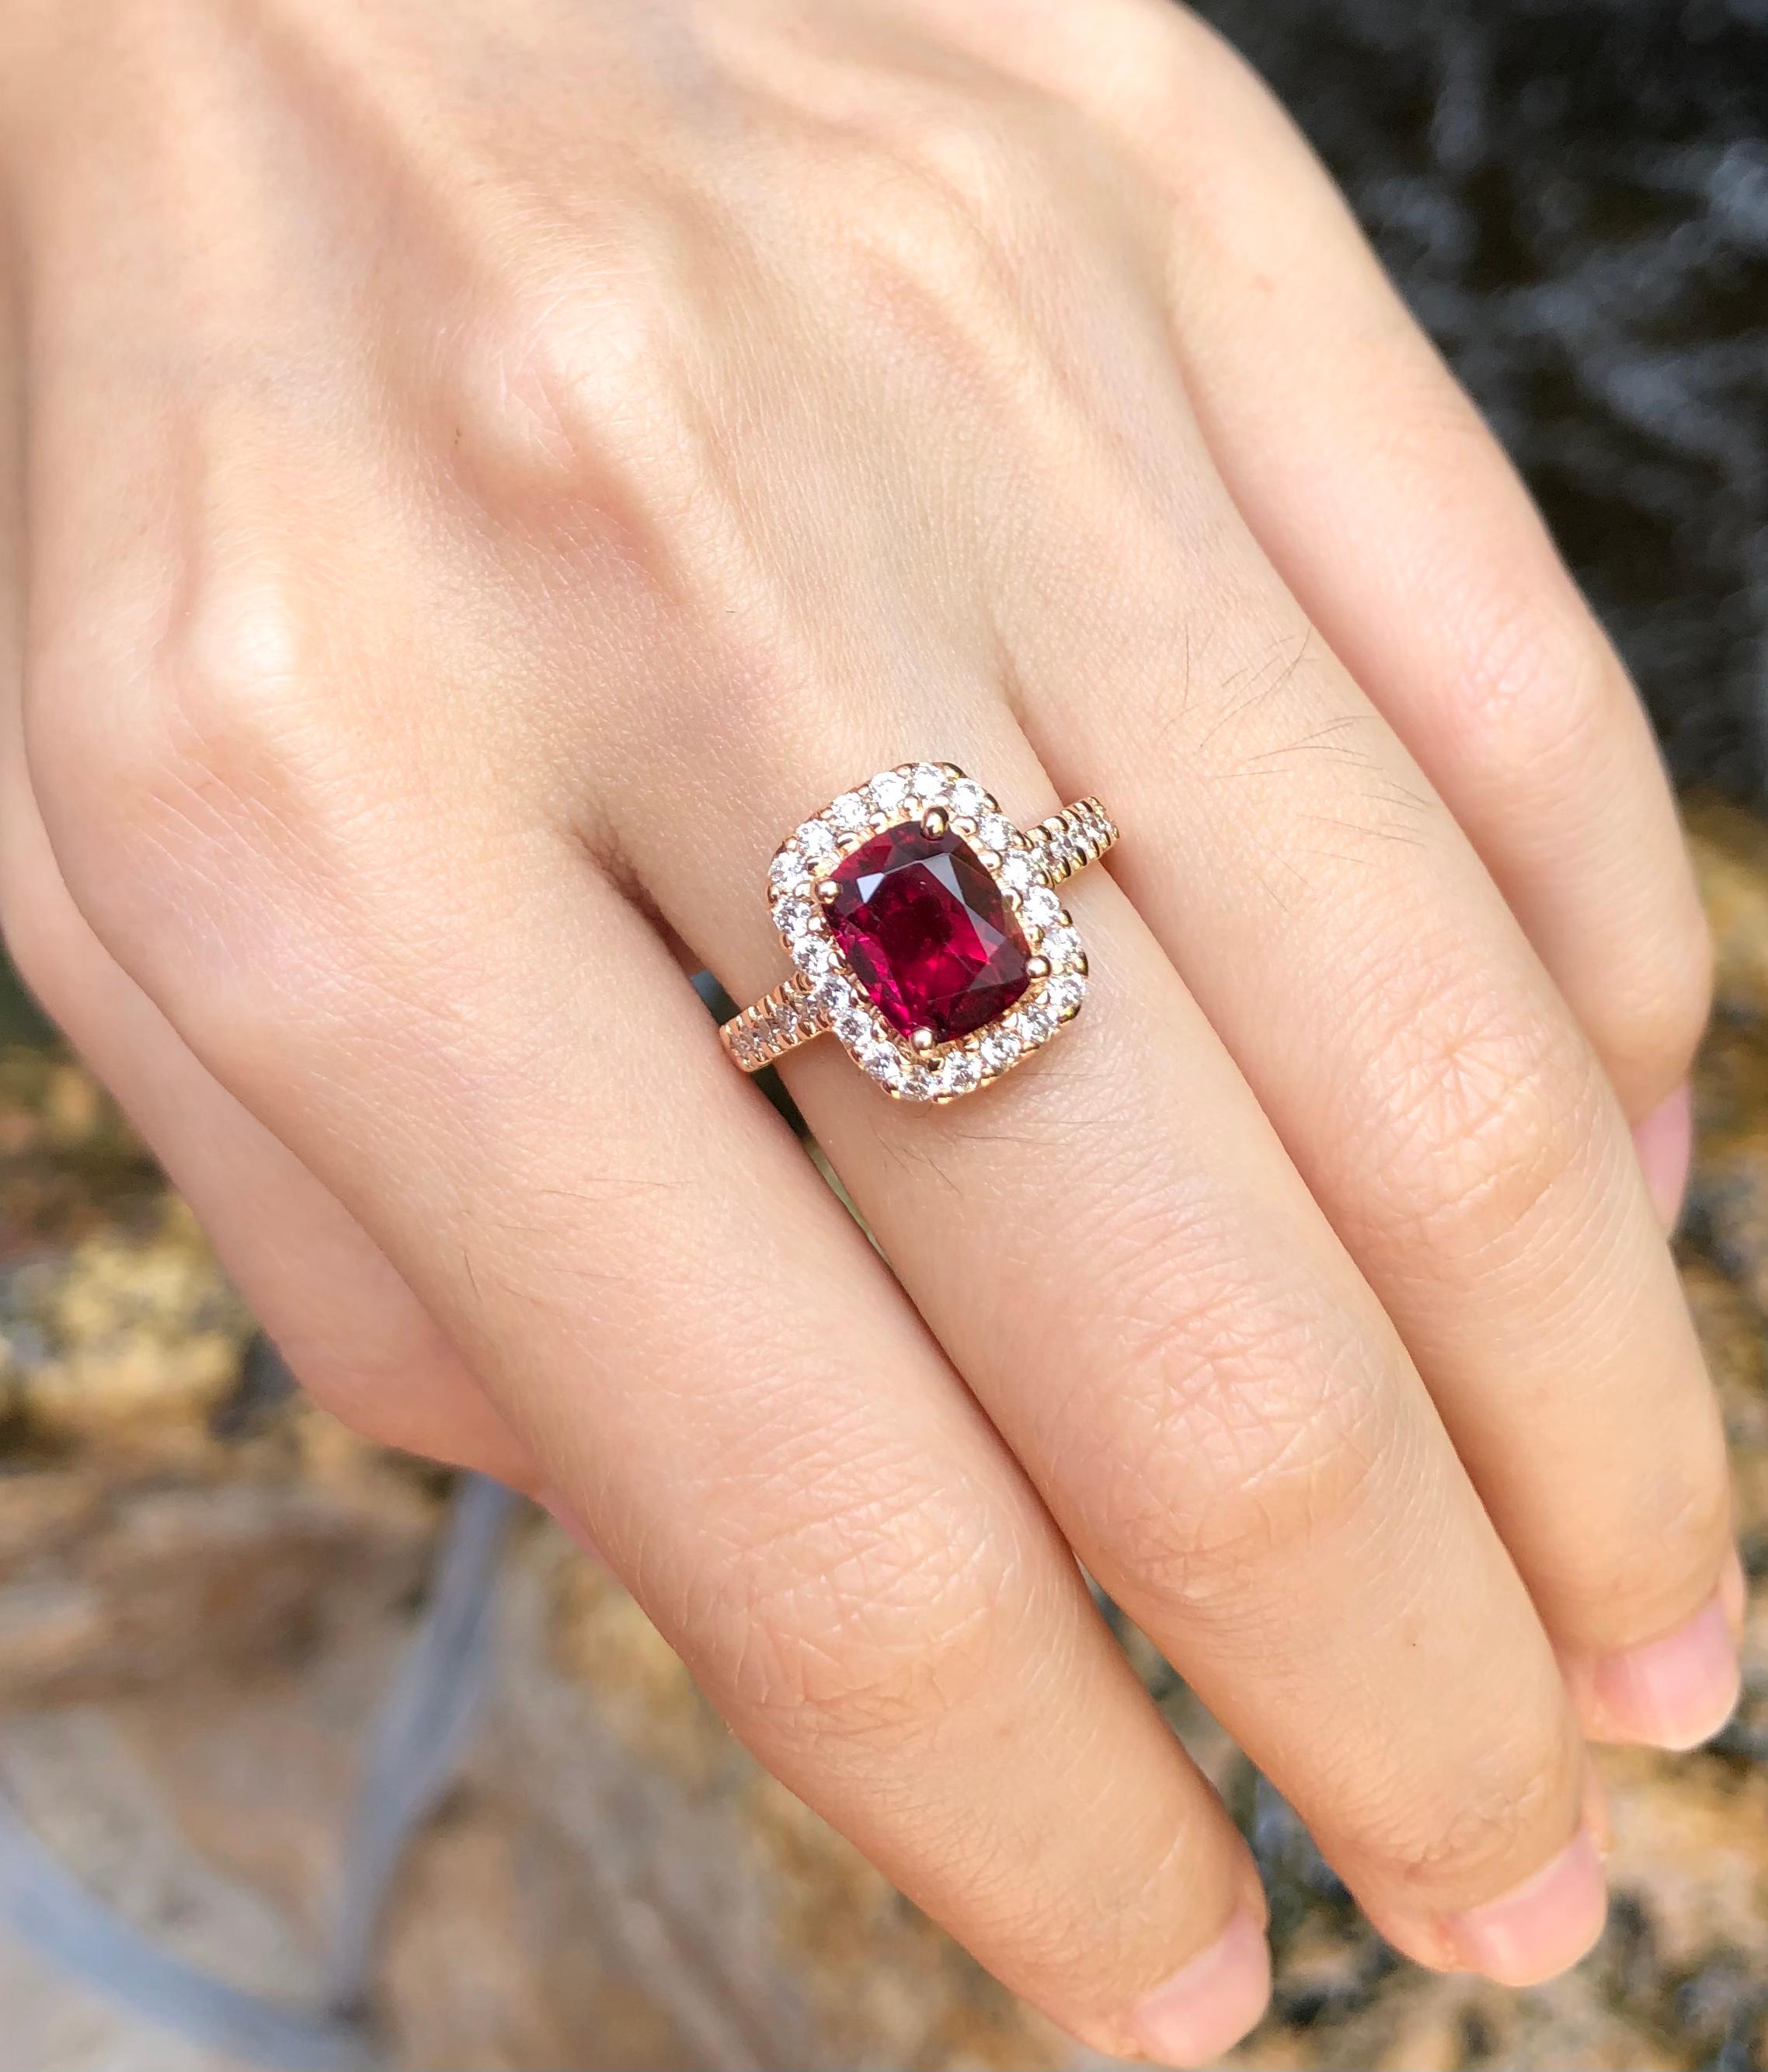 Rubellite 1.50 carats with Diamond 0.52 carat Ring set in 18 Karat Rose Gold Settings

Width:  1.0 cm 
Length:  1.3 cm
Ring Size: 52
Total Weight: 4.84 grams

Rubellite Stone
Width:  0.7 cm 
Length:  0.9 cm

